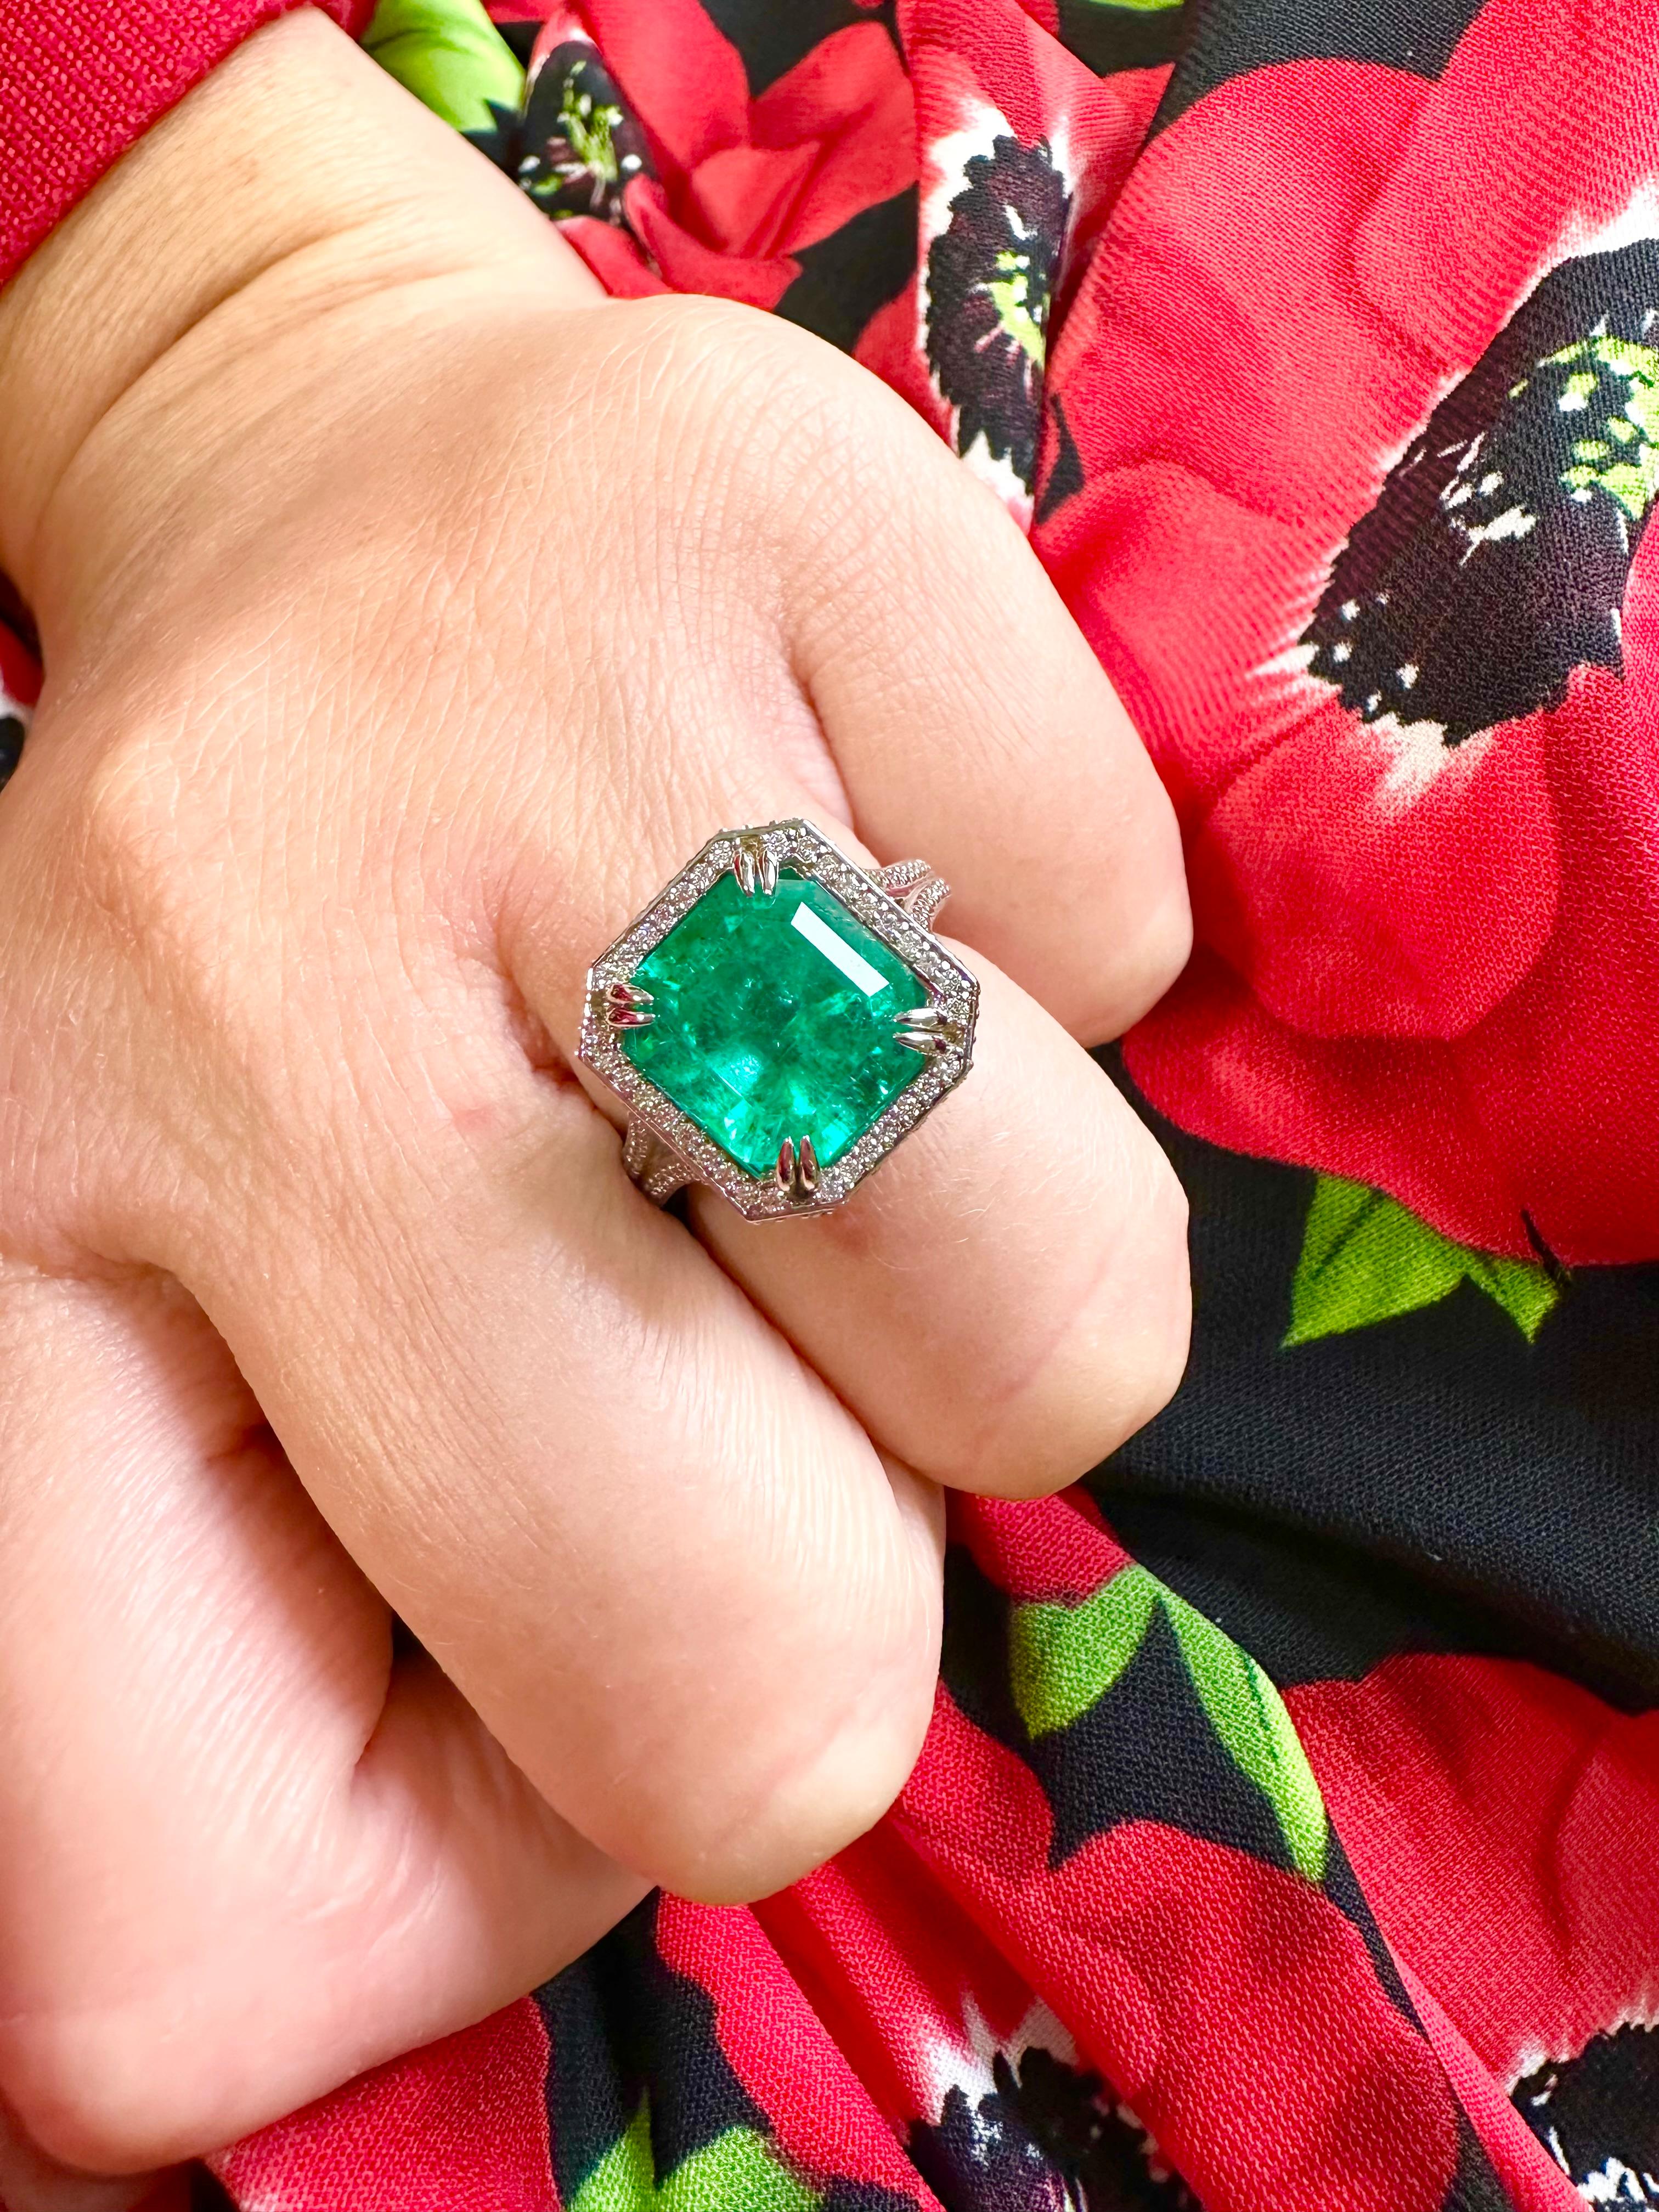 Square Cut Emerald Diamond Ring Engagement Ring 18kt White Gold Rare Colombian Gia Emerald For Sale